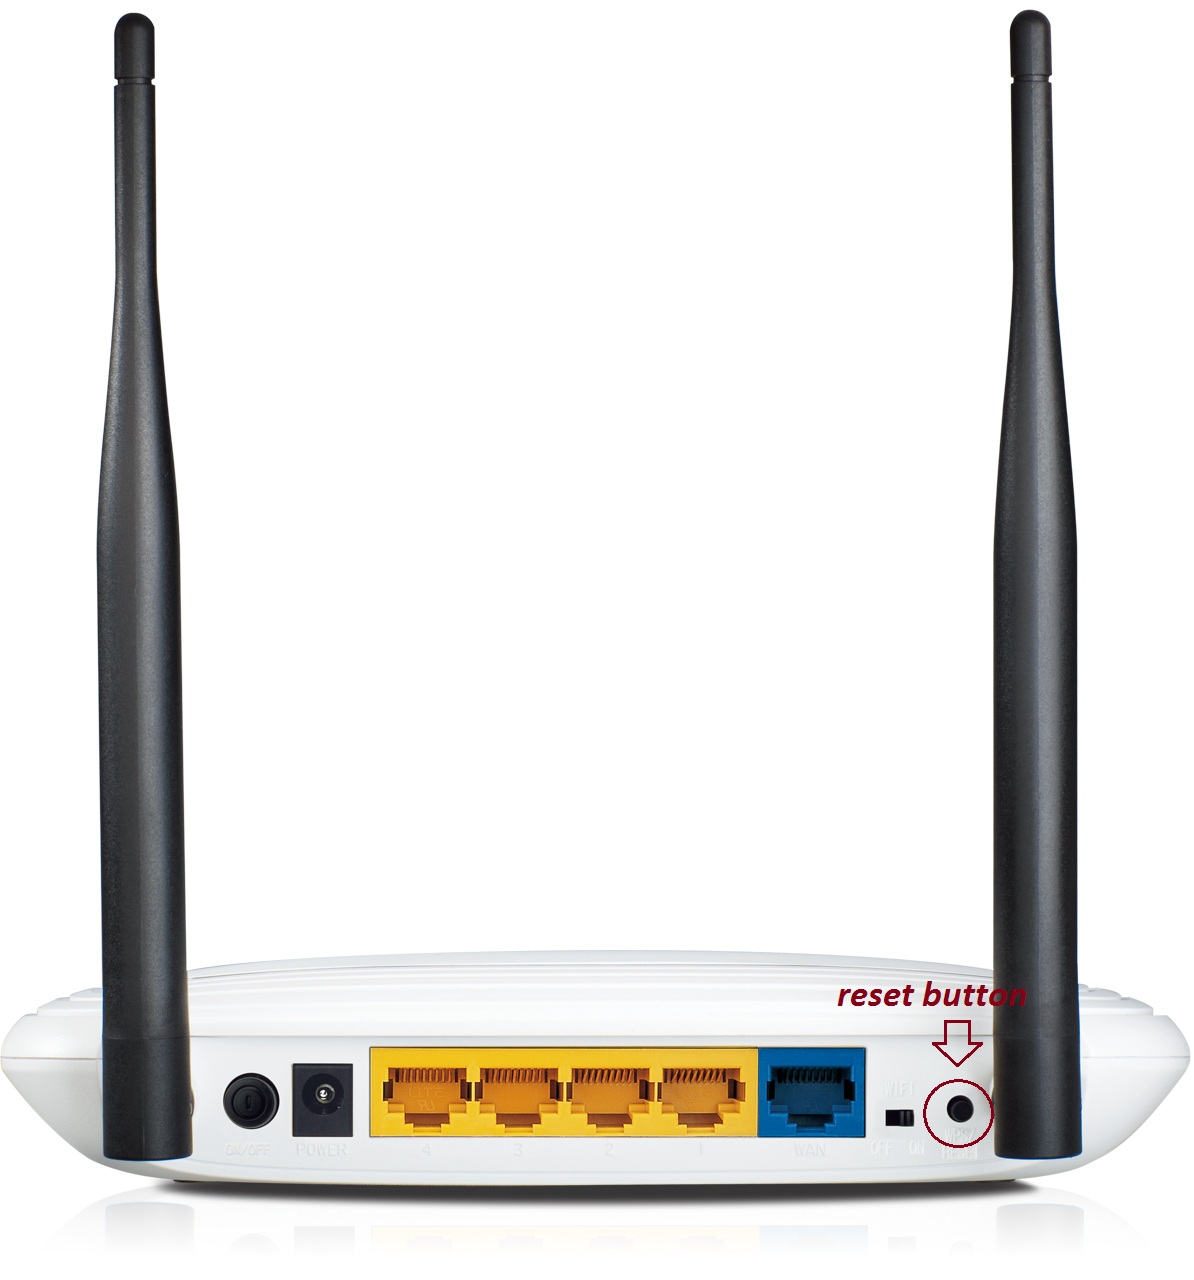 Hard reset TP-LINK TL-WR28N - How to Hard Reset Your Router